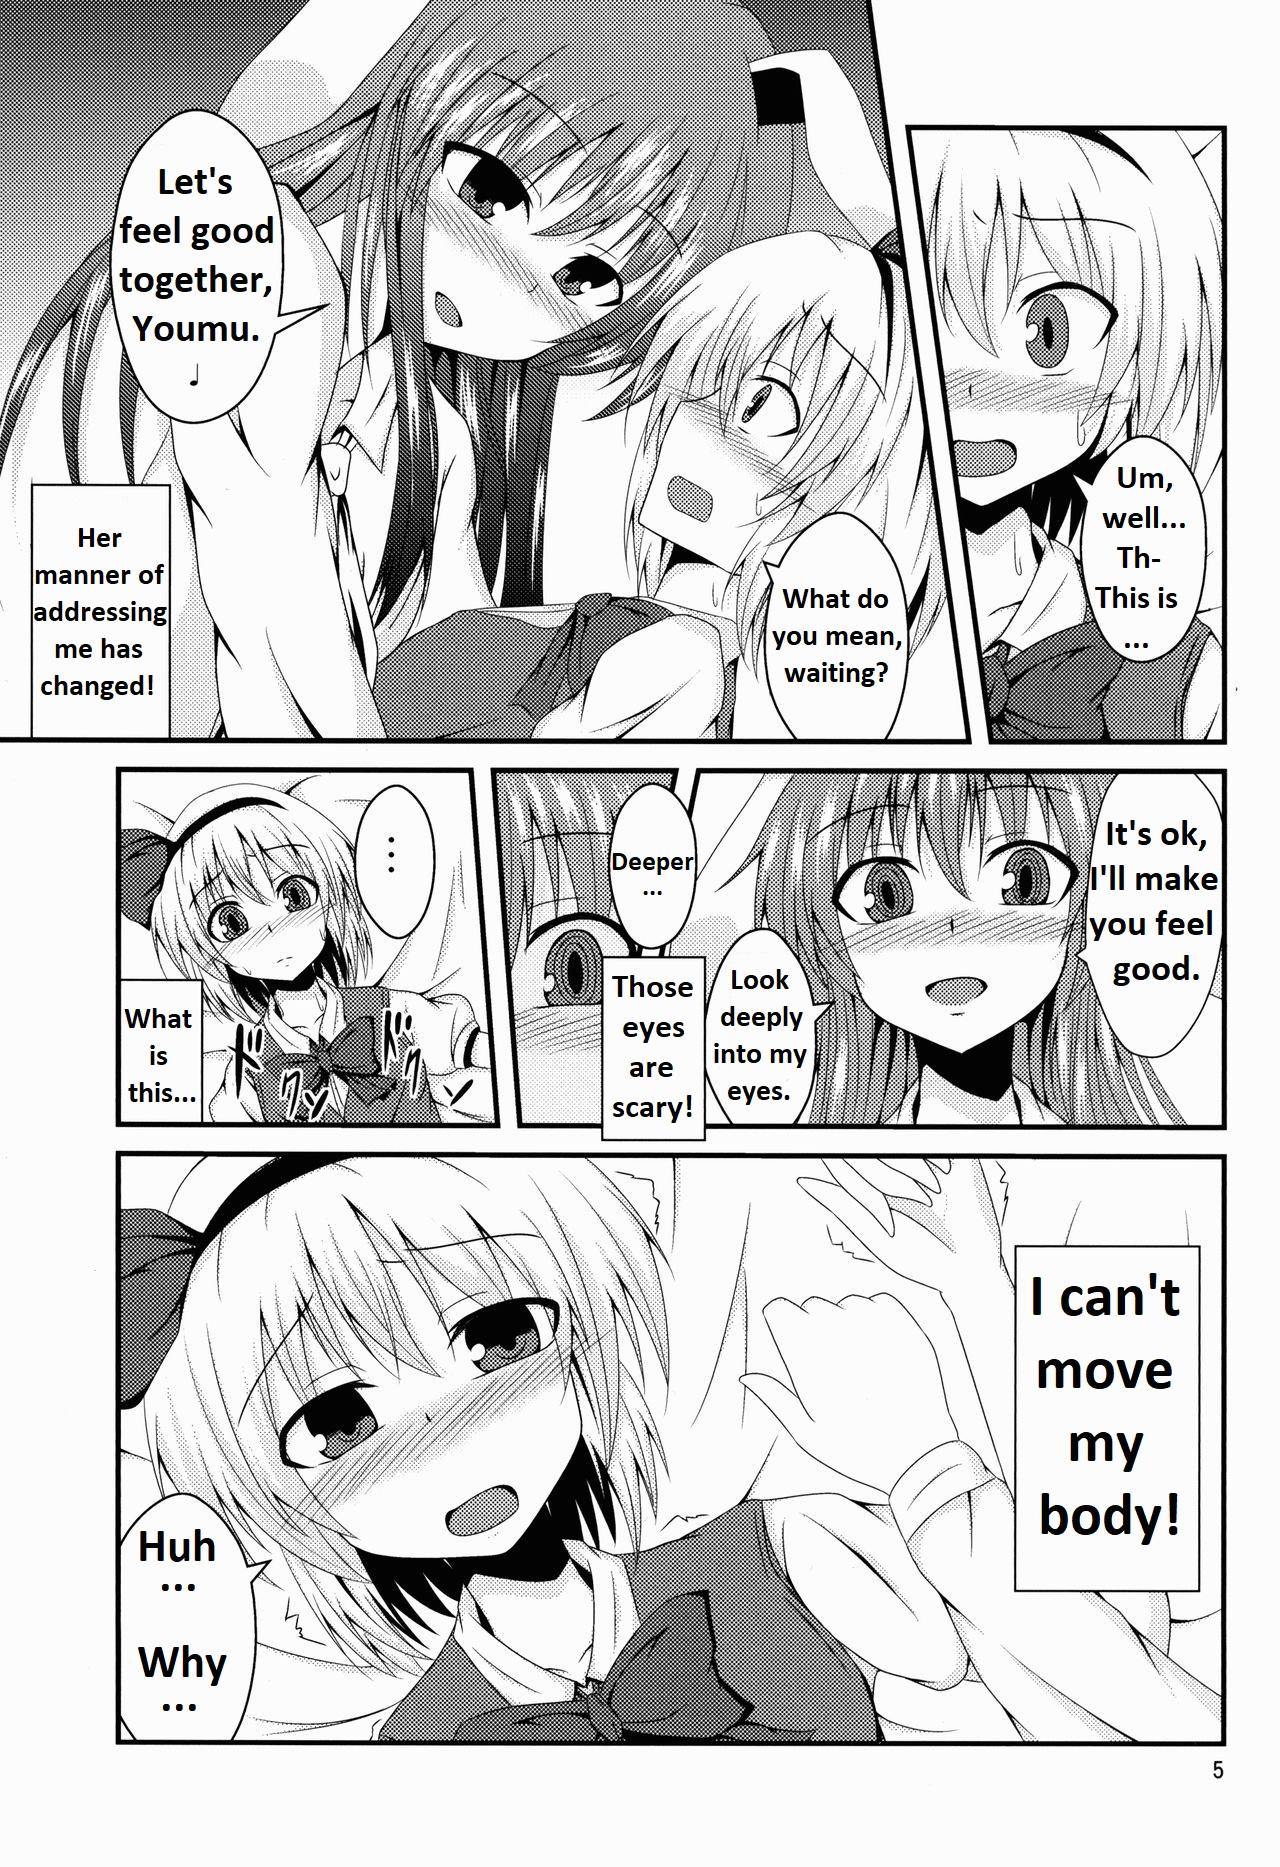 Hypnosis Page 6 Of 23 touhou project hentai comic, Hypnosis Page 6 Of 23 to...